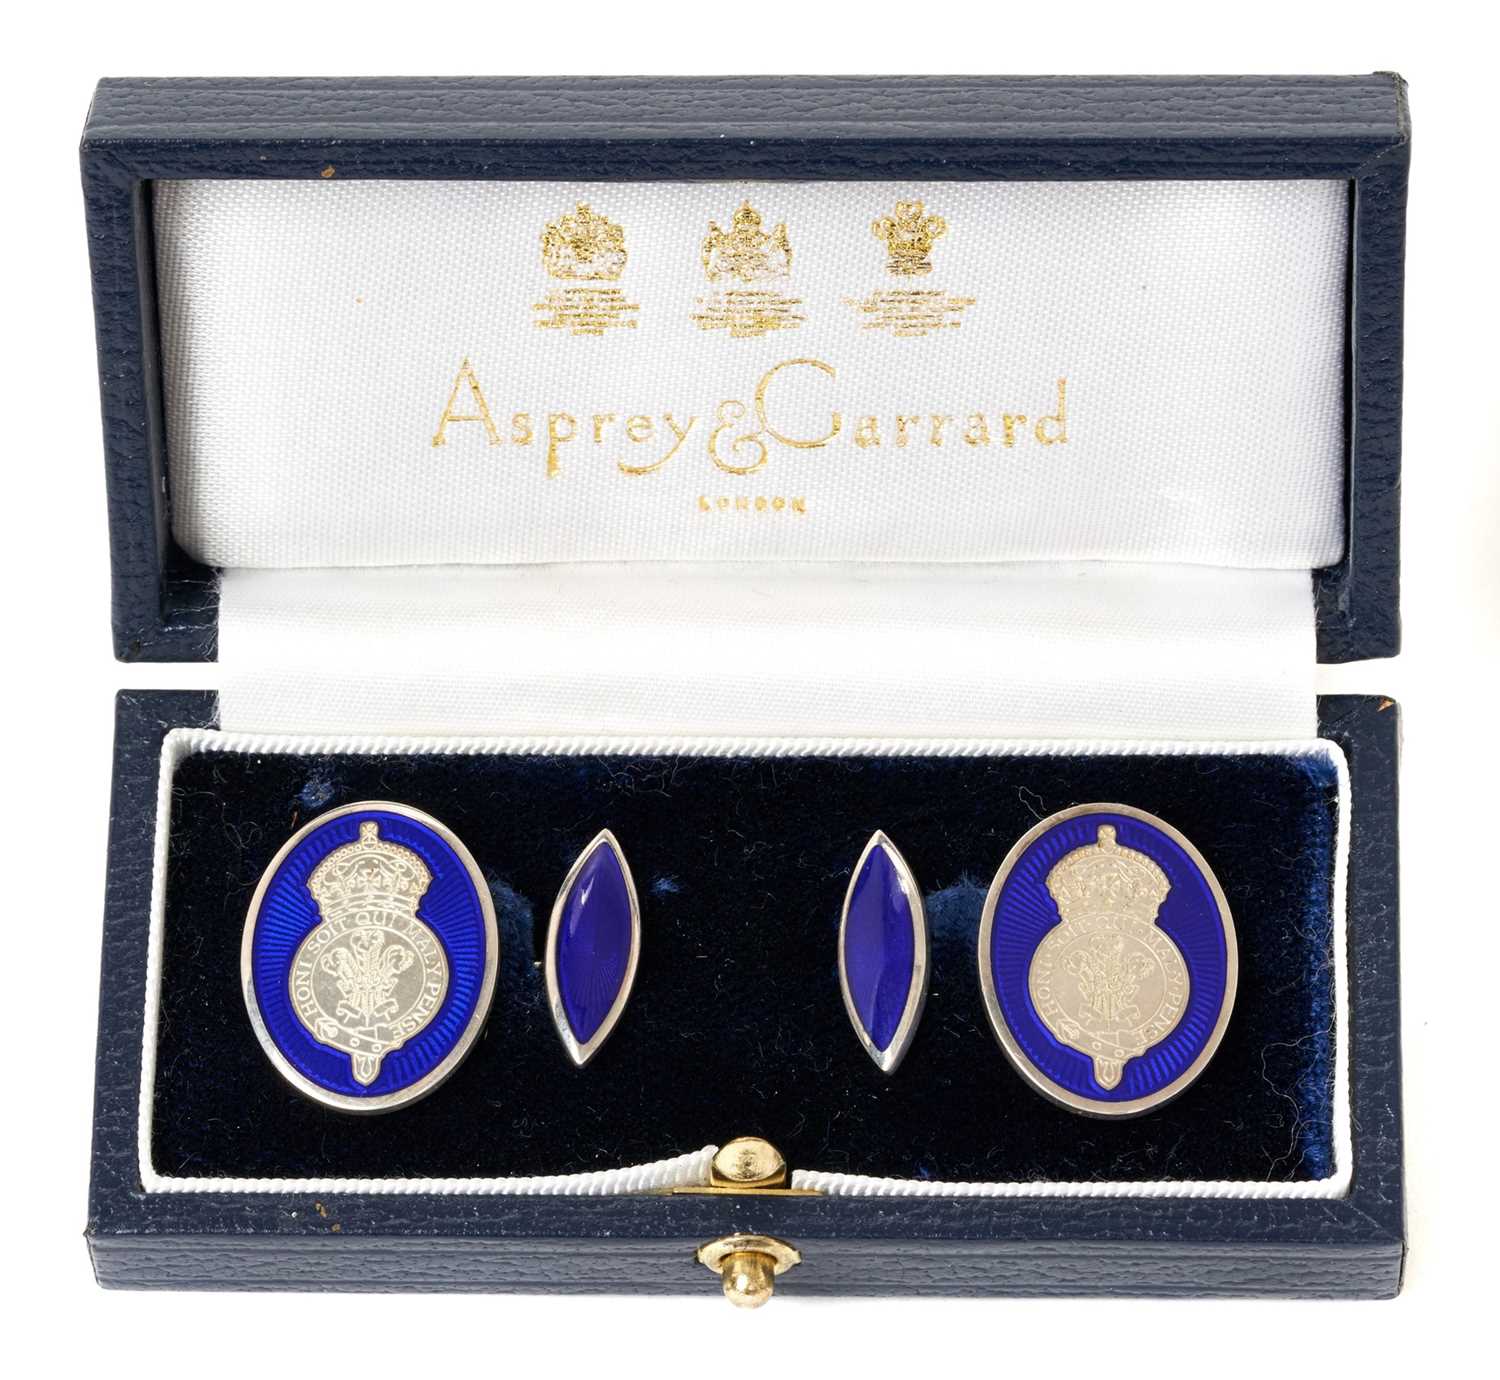 Lot 72 - H.R.H. Prince Charles Prince of Wales, (now H.M. King Charles III) silver and enamel presentation cufflinks by Asprey-Garrard in  case , (hallmarked 1998)